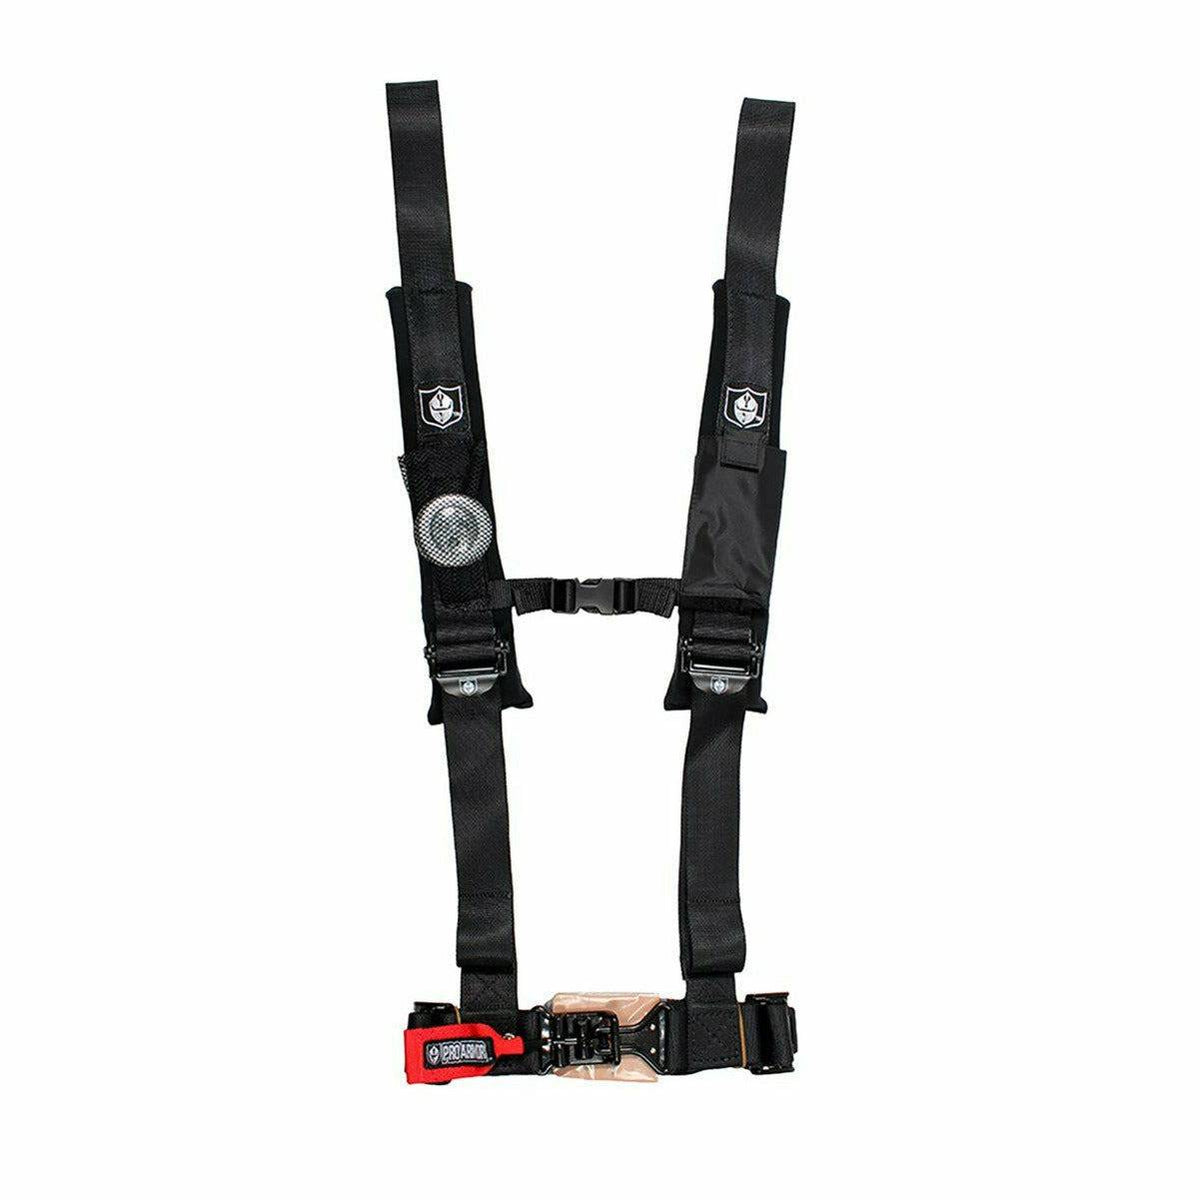 Pro Armor 5 Point 2" Harness with Sewn in Pads